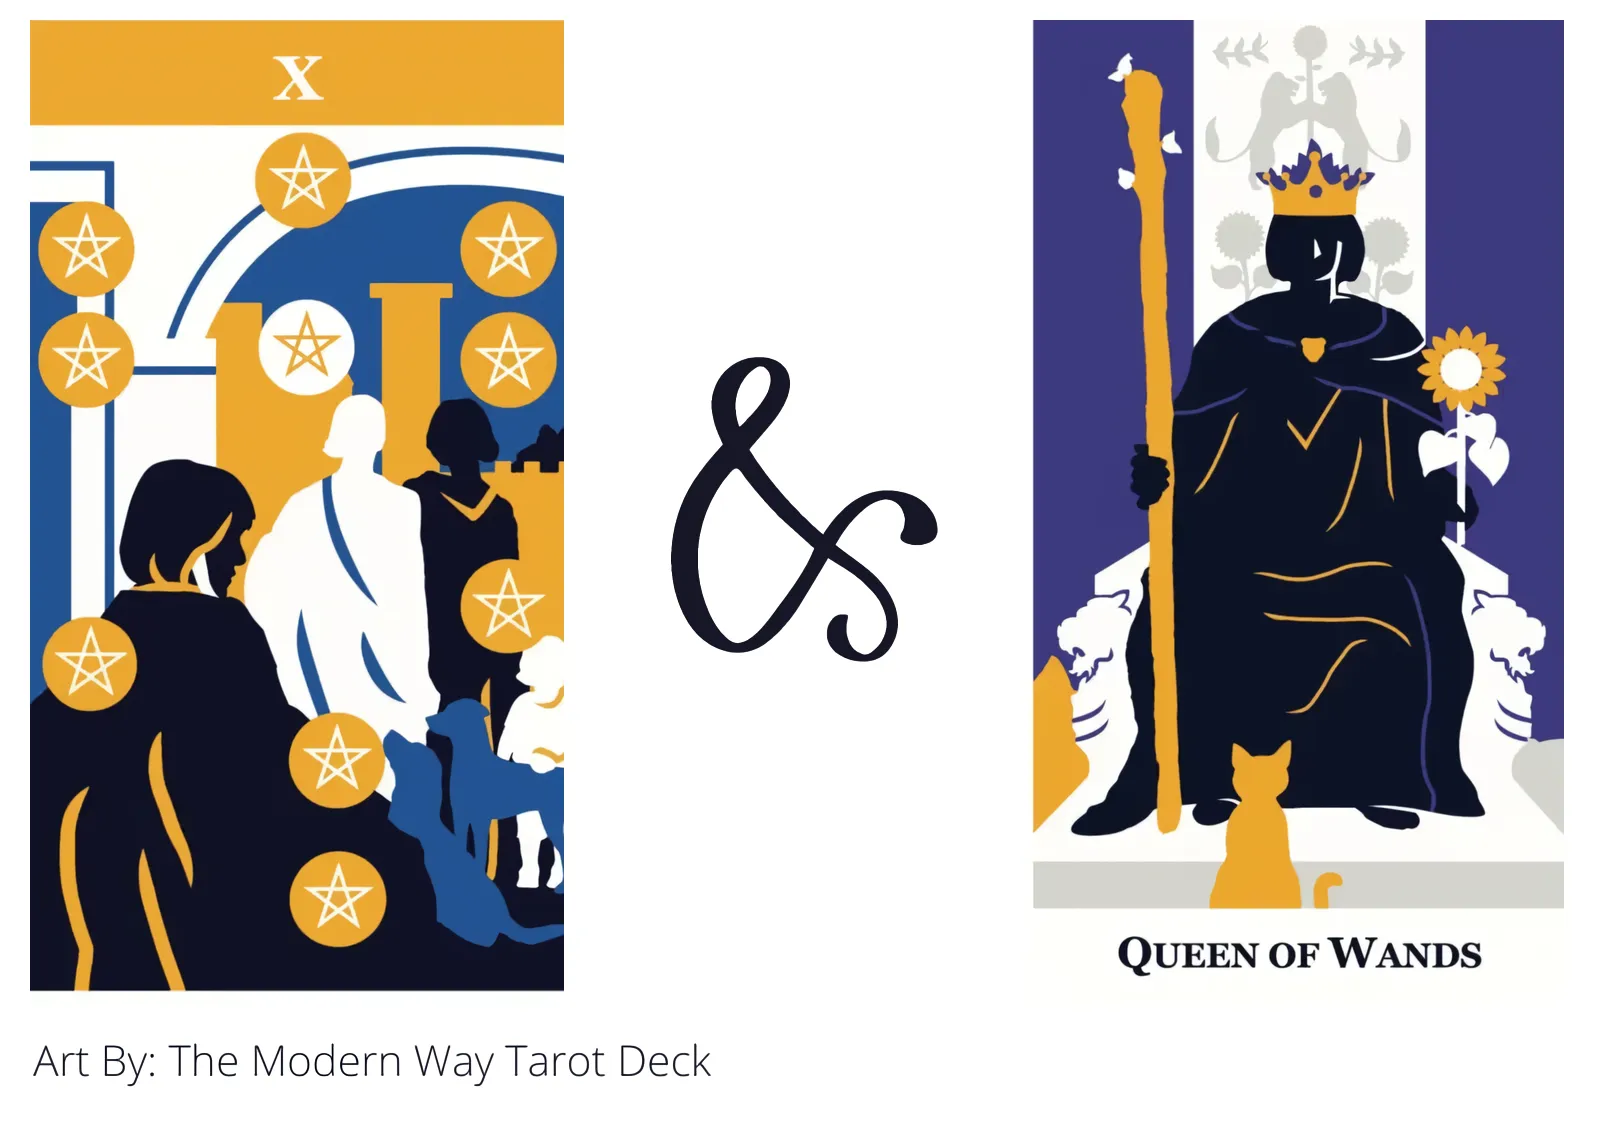 ten of pentacles and queen of wands tarot cards together